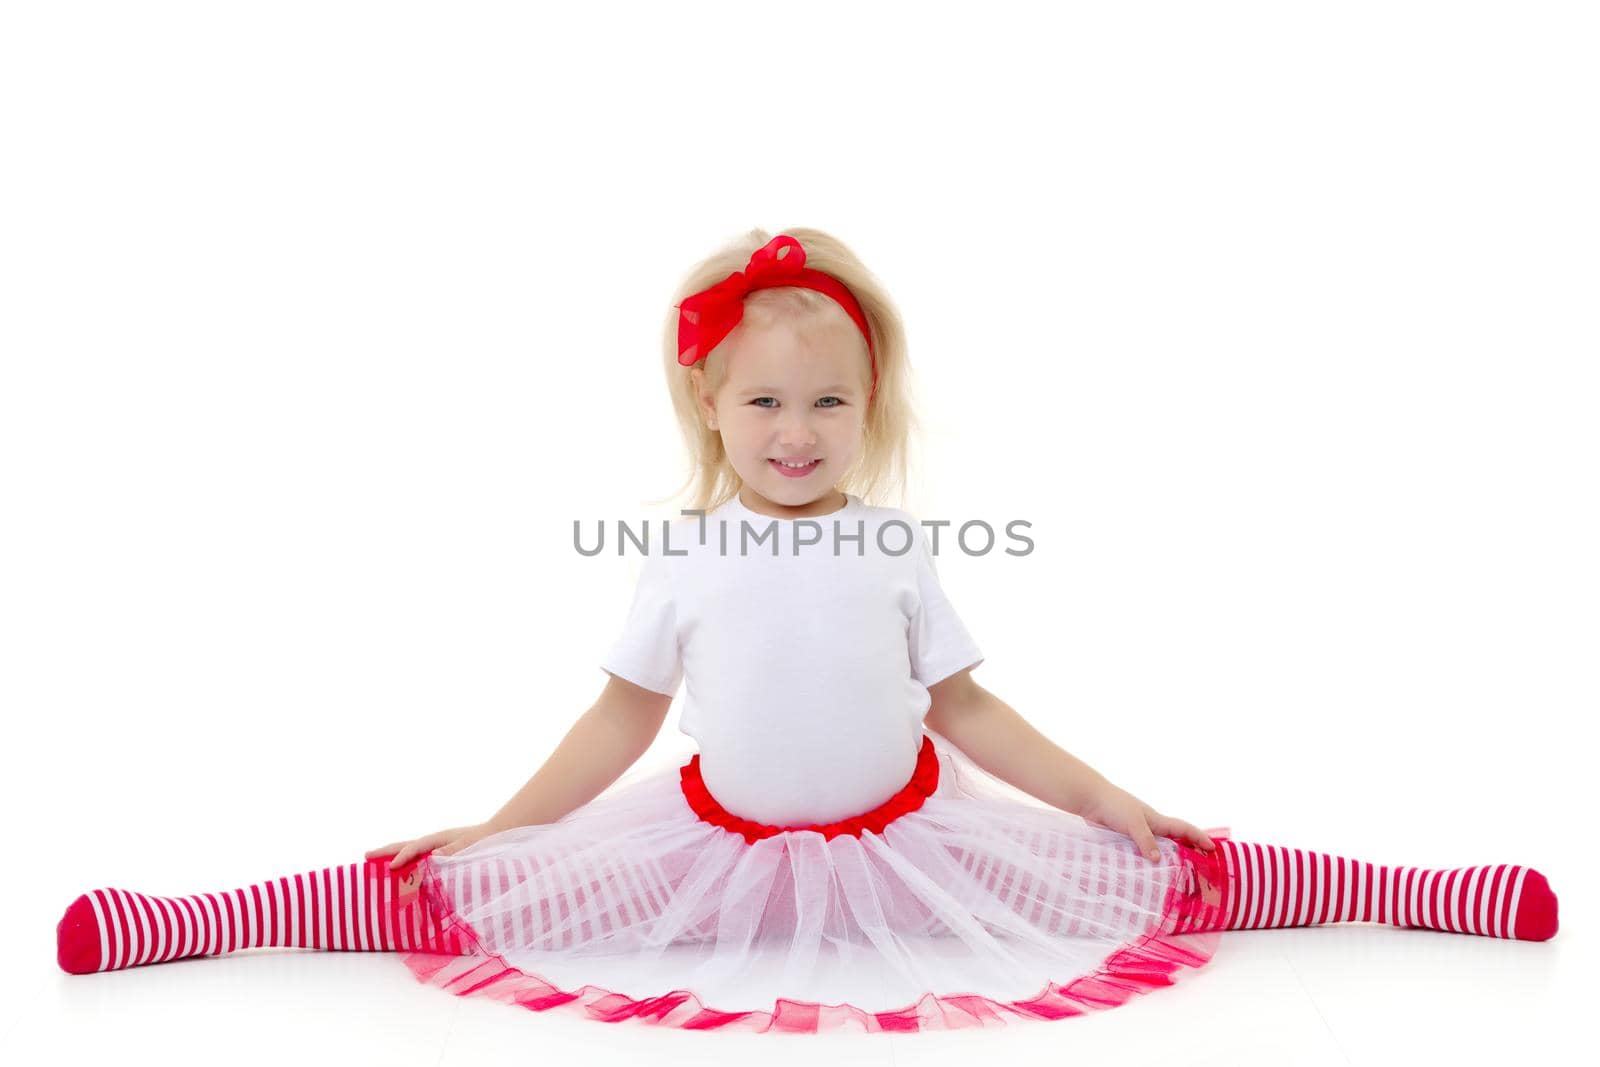 Little girl schoolgirl, performs gymnastic twine in the studio on a white background. Concept of fitness and sport and healthy lifestyle.